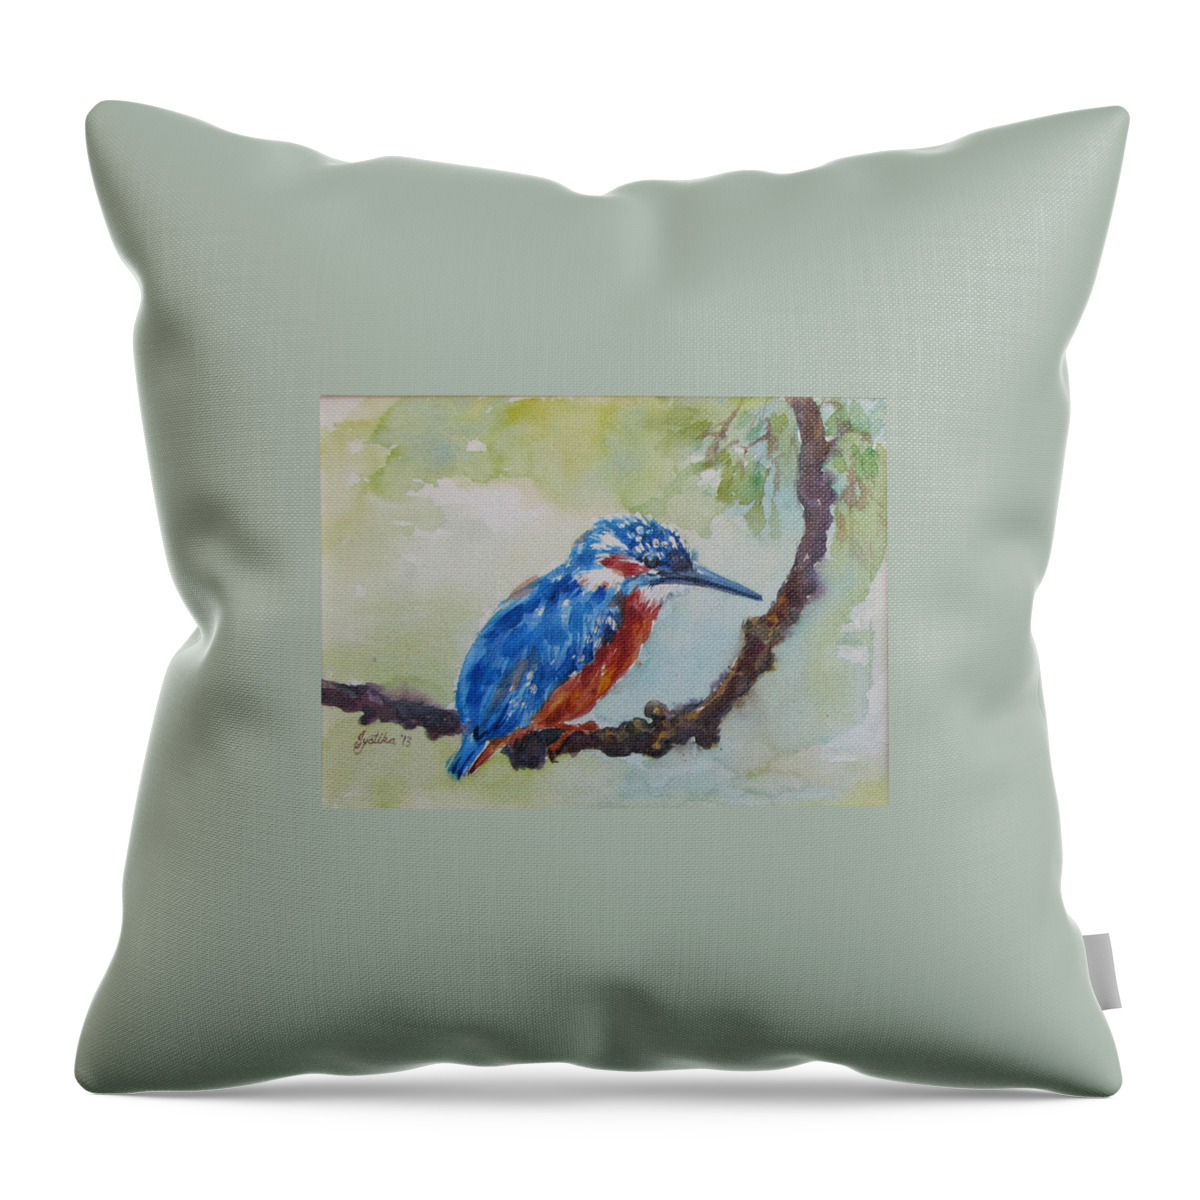 Bird Throw Pillow featuring the painting The Kingfisher by Jyotika Shroff